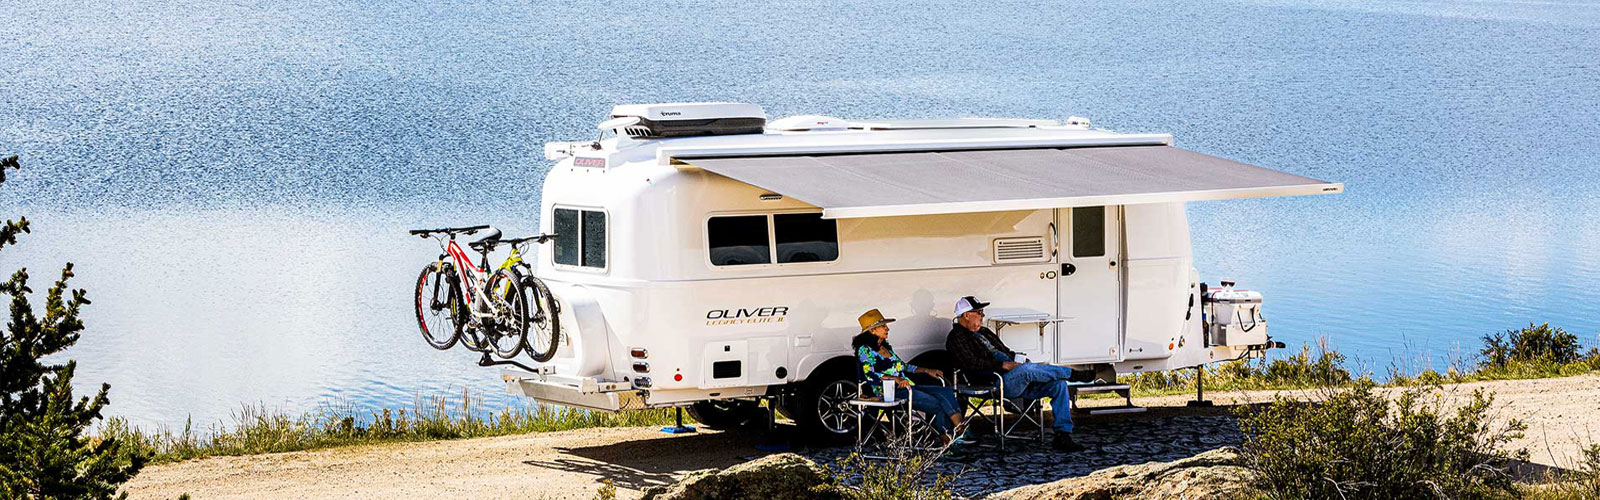 Oliver stands as a testament to being one of the best-built travel trailers, offering a combination of durability, comfort, and elegance.